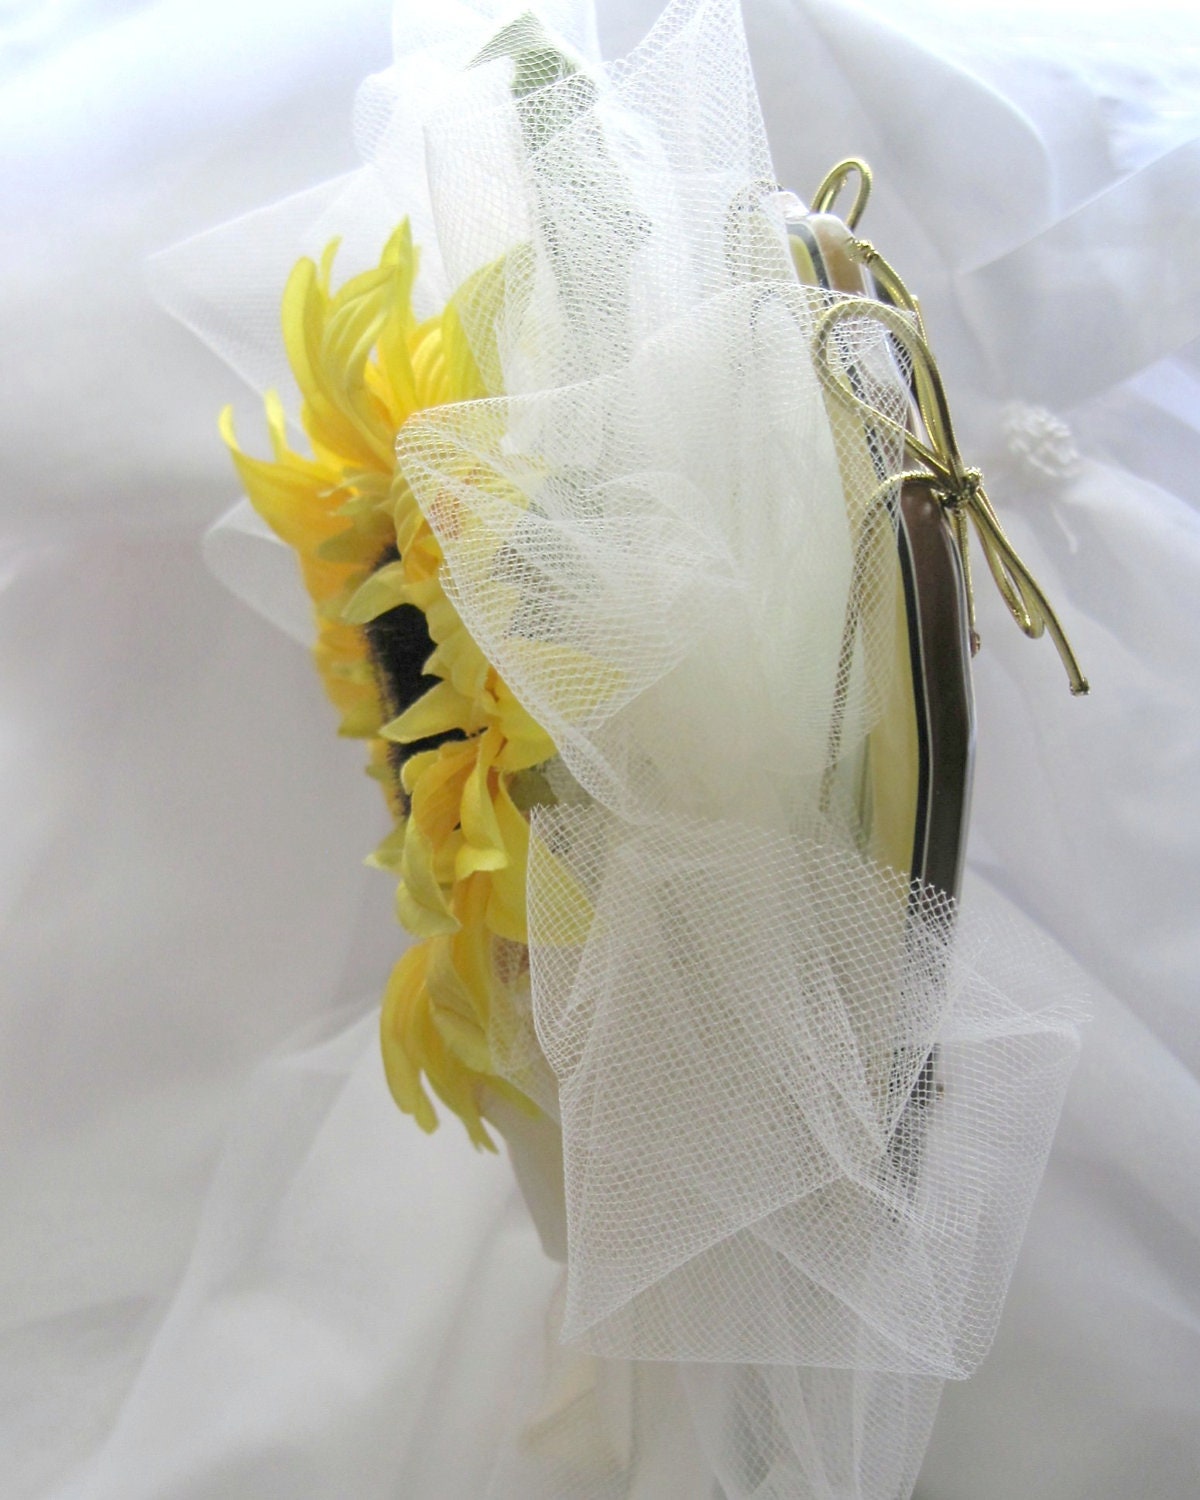 Wedding Bouquet, Silky Golden Sunflower Blossom, Green Leaves, Attaches to Wedding Art  Mirrors, For Bride, Bridesmaid, Or Maid of Honor